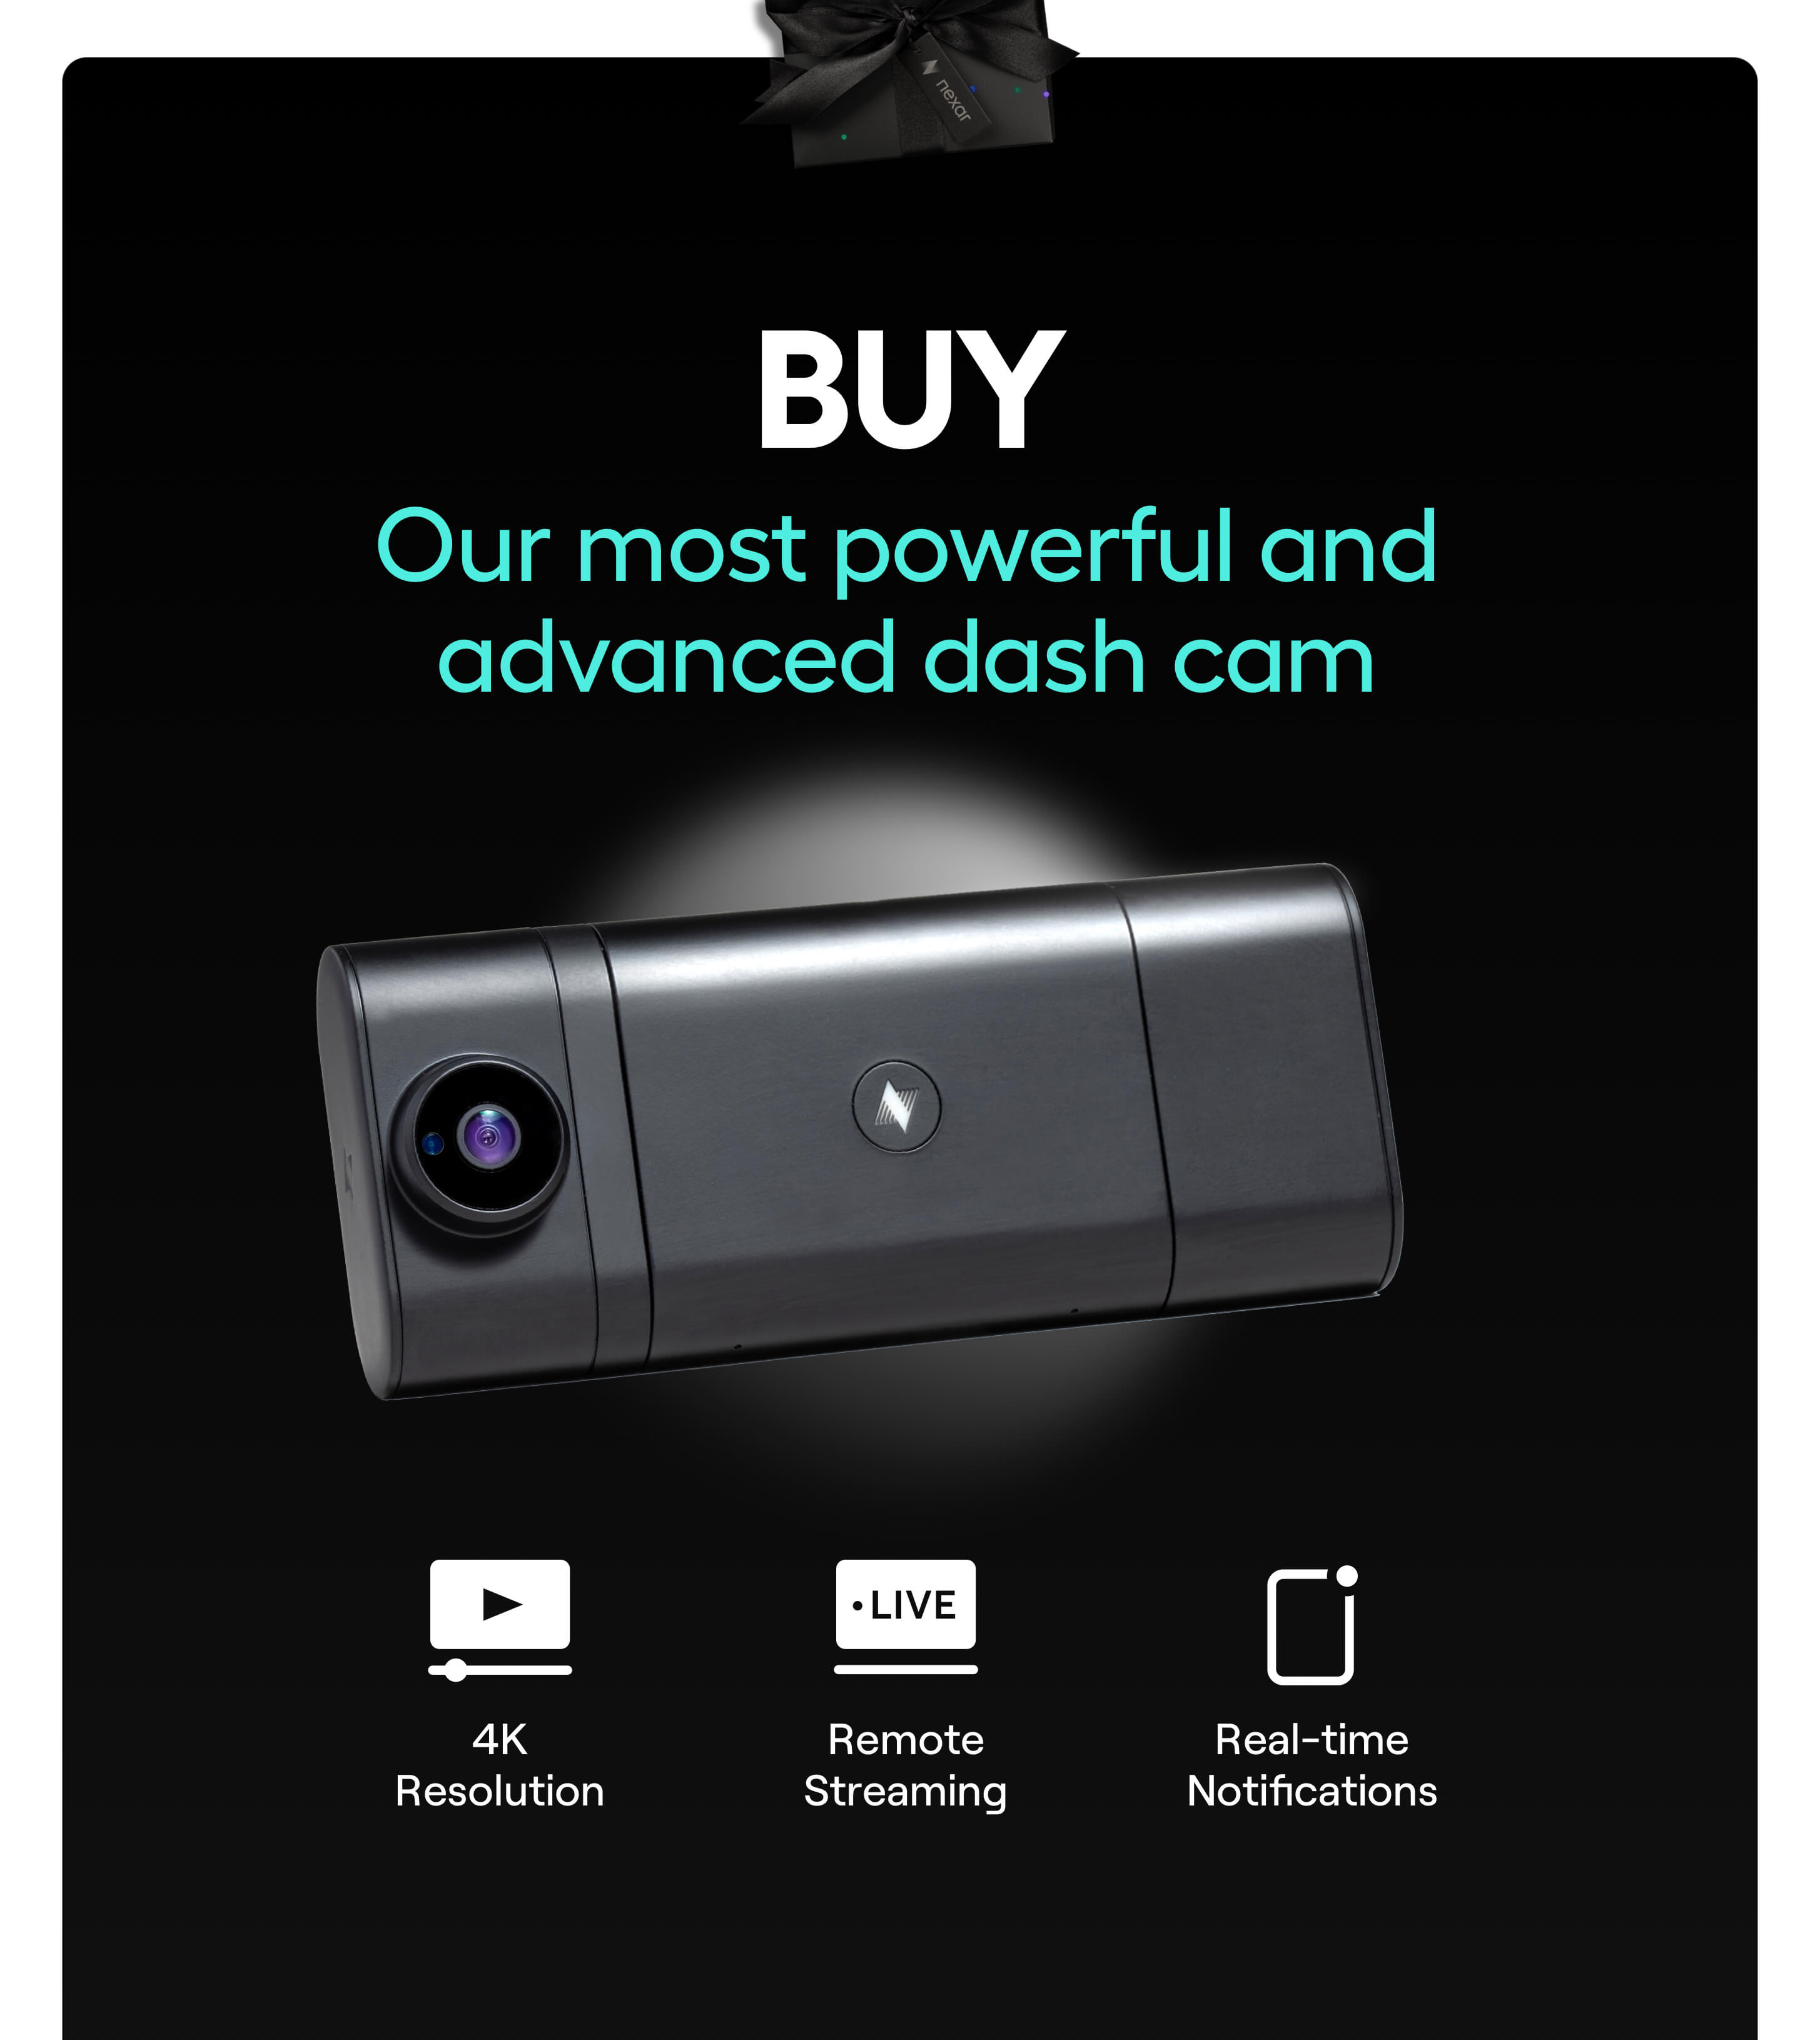 Buy ONE get FREE BEAM now!!!